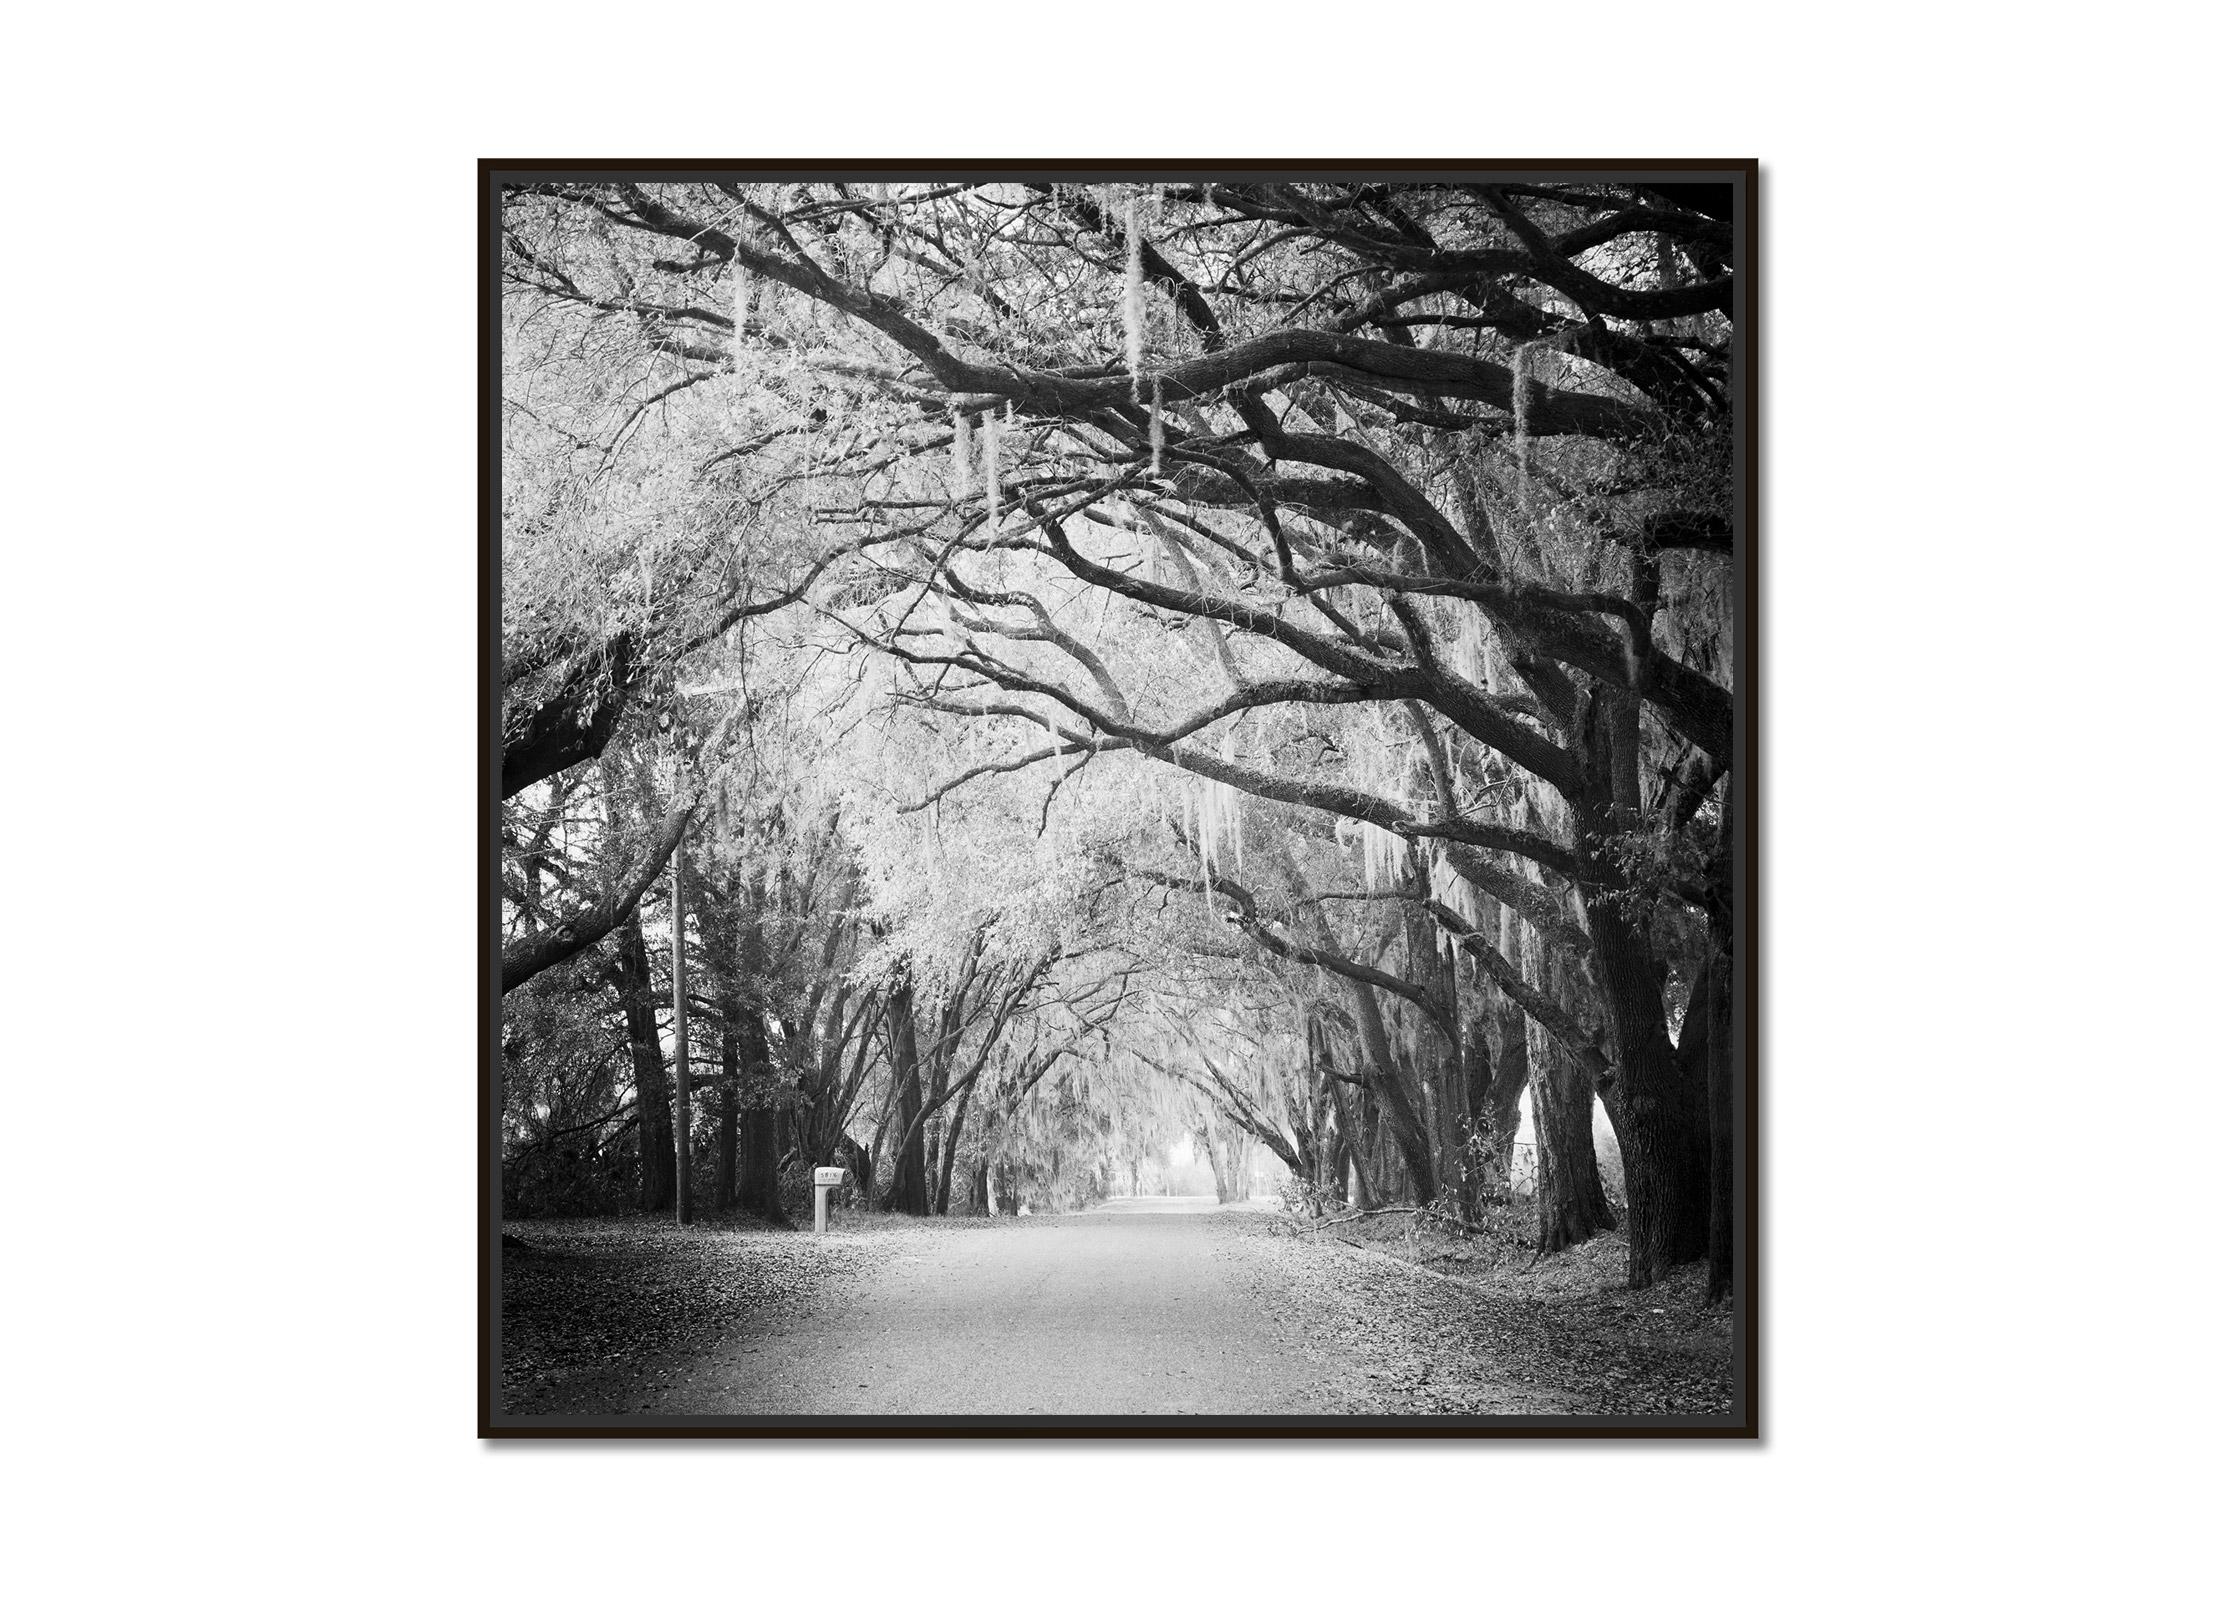 Fairytale Forest, Tree Avenue, Florida, black and white photography, landscape - Photograph by Gerald Berghammer, Ina Forstinger